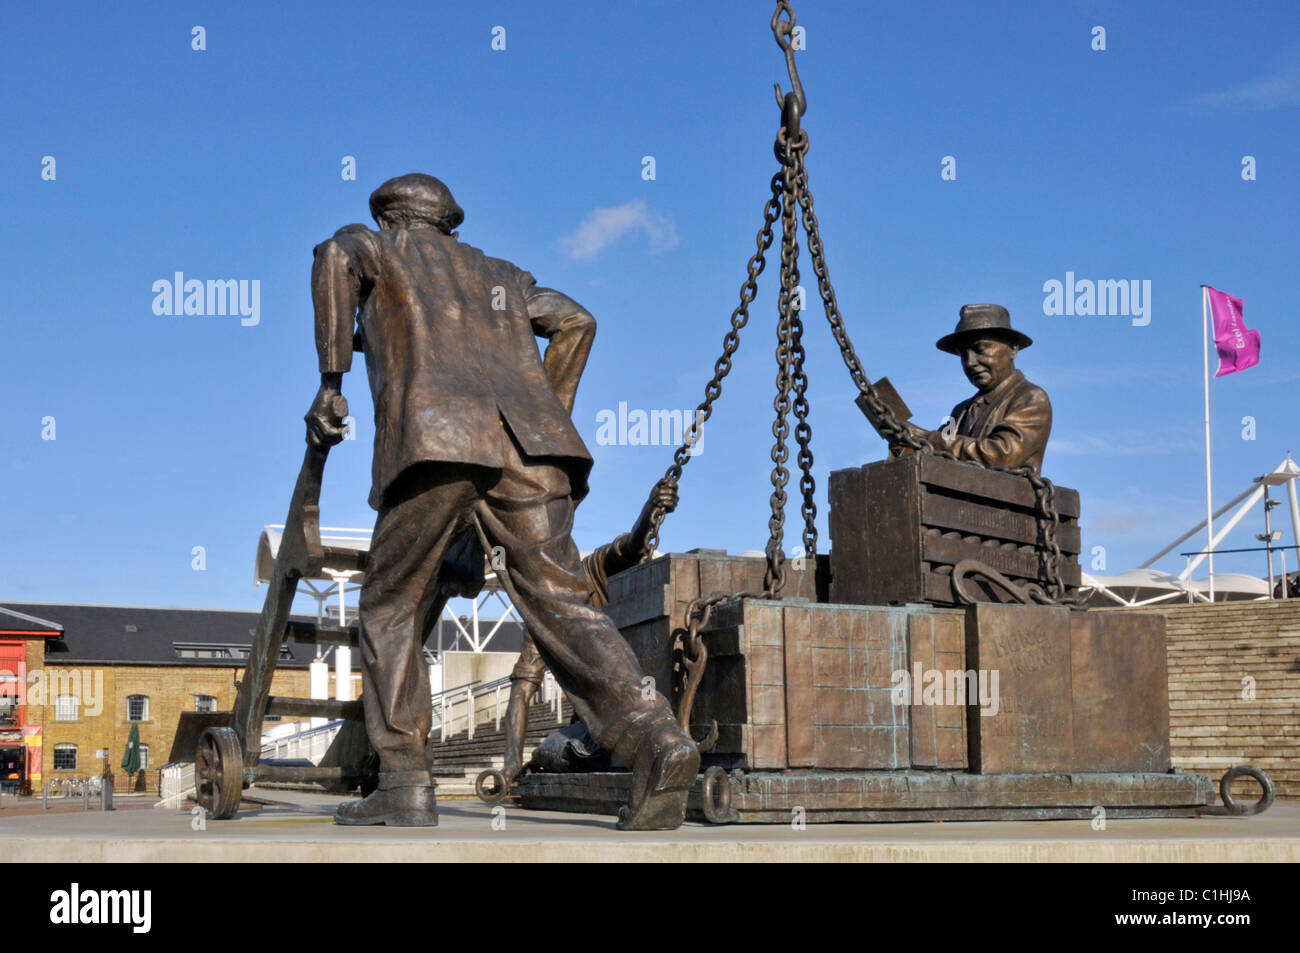 Historical tribute sculpture statue dockers working outside Excel Exhibition Centre London Docklands entitled Landed by sculptor Les Johnson Newham UK Stock Photo